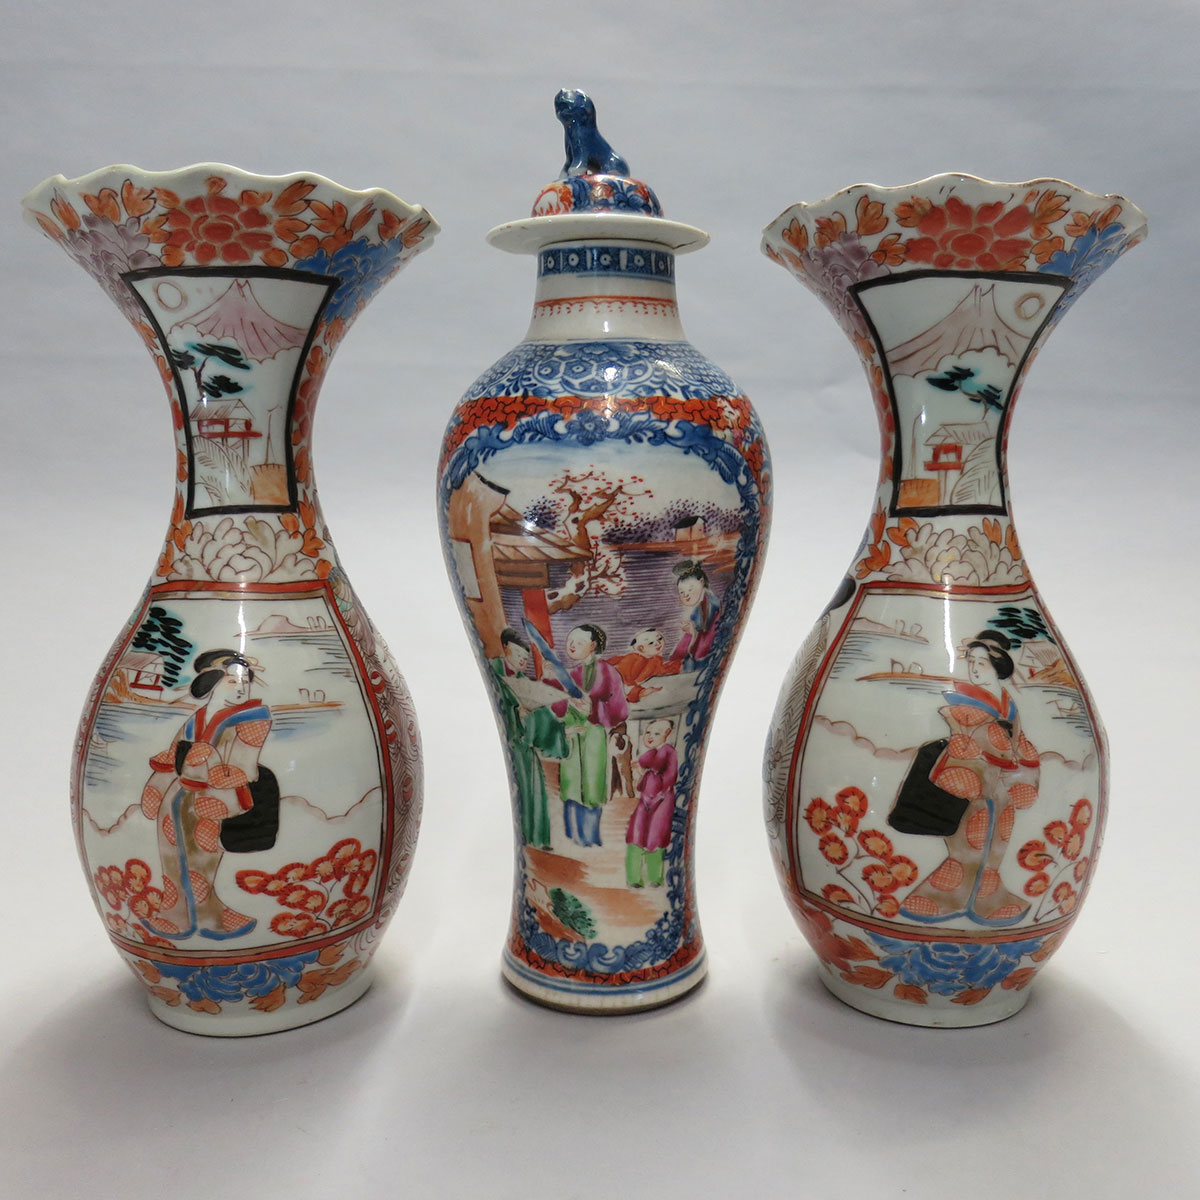 Export Canton Rose Baluster Vase and Cover, 18th Century